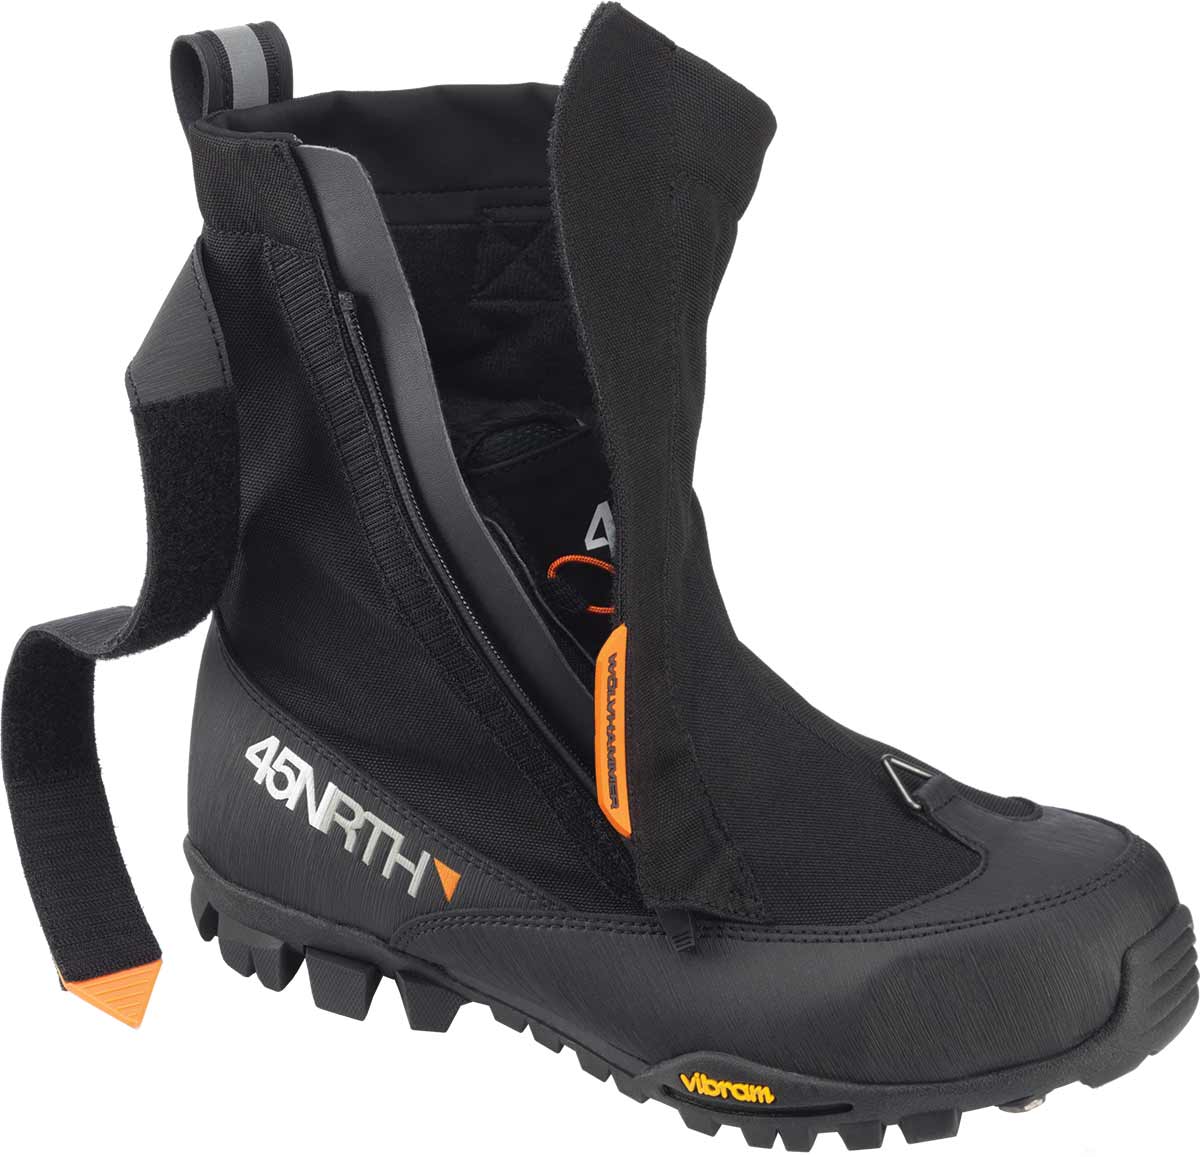 45nrth wolvhammer cycling boots